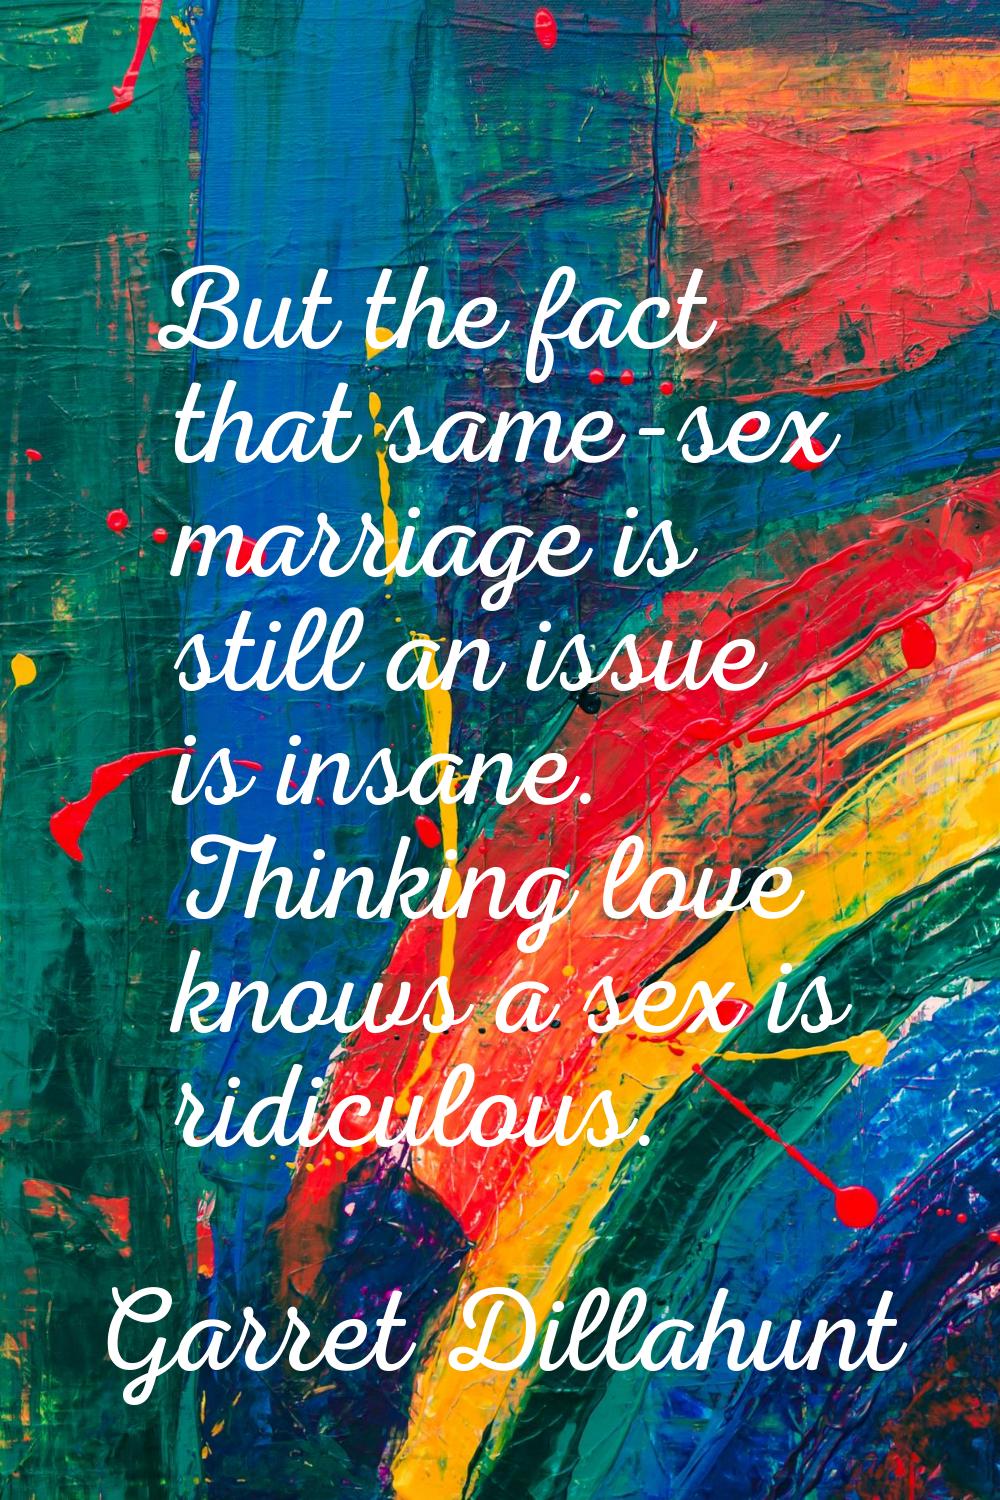 But the fact that same-sex marriage is still an issue is insane. Thinking love knows a sex is ridic